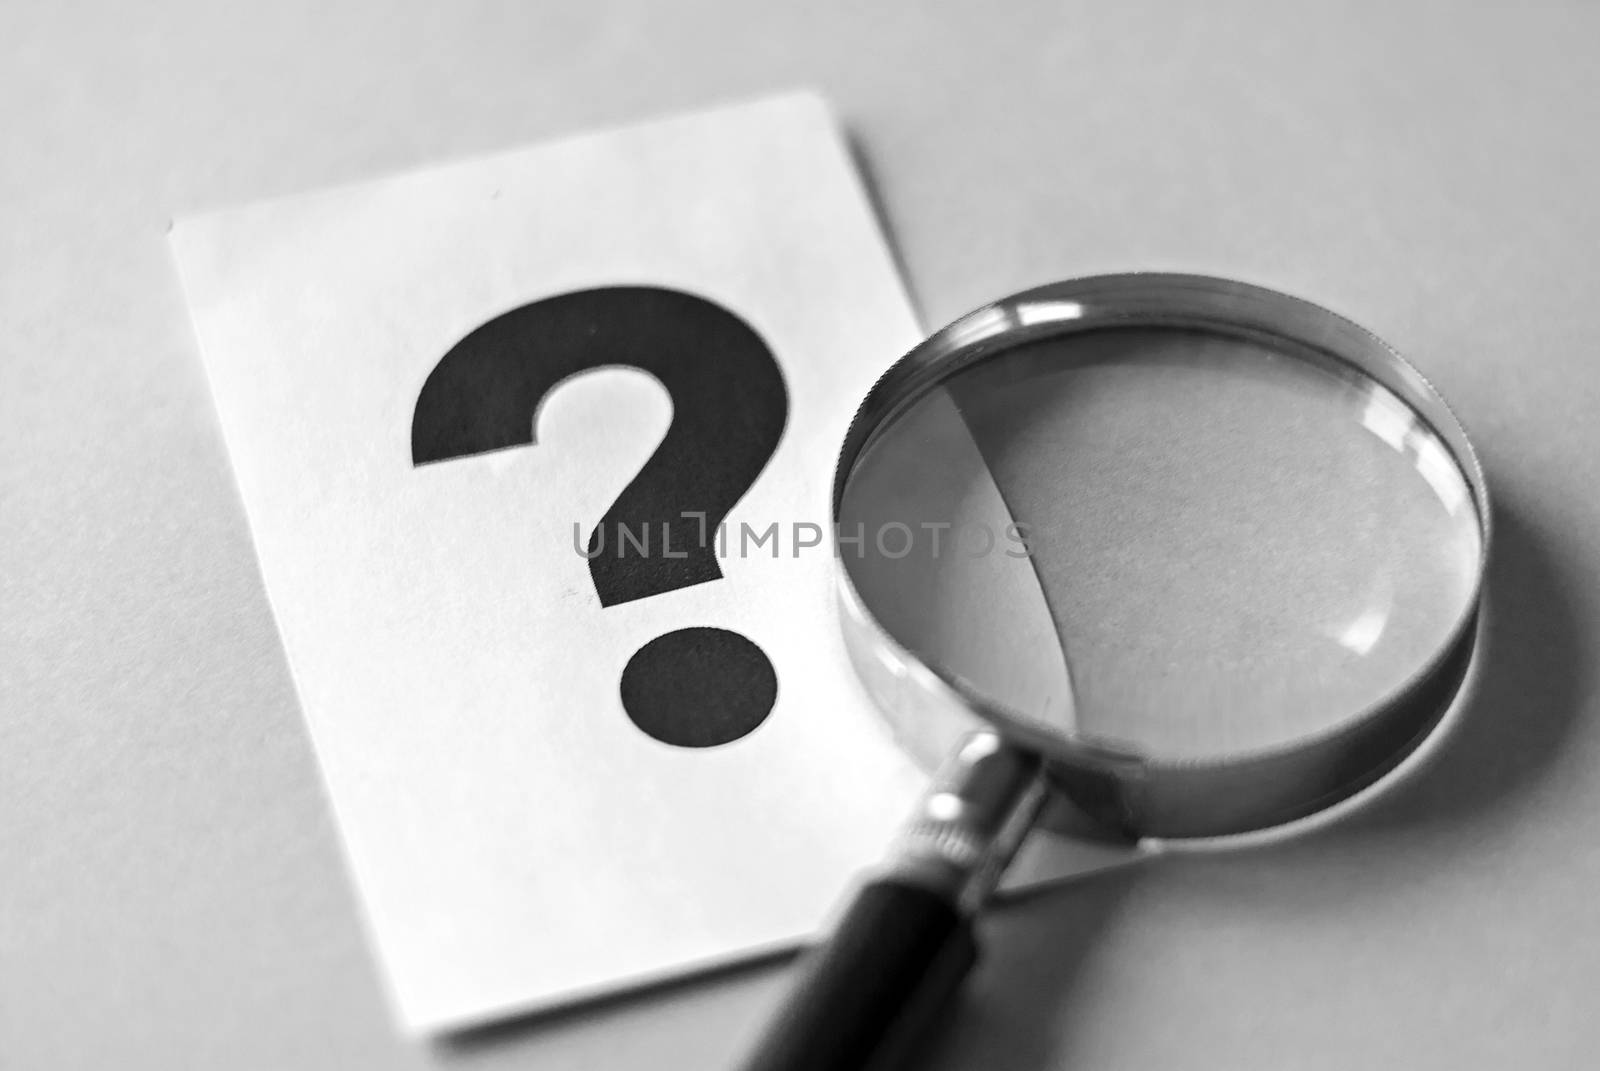 Magnifying glass on grey surface, next to big black question mark printed on white sheet of paper. Search for answers concept